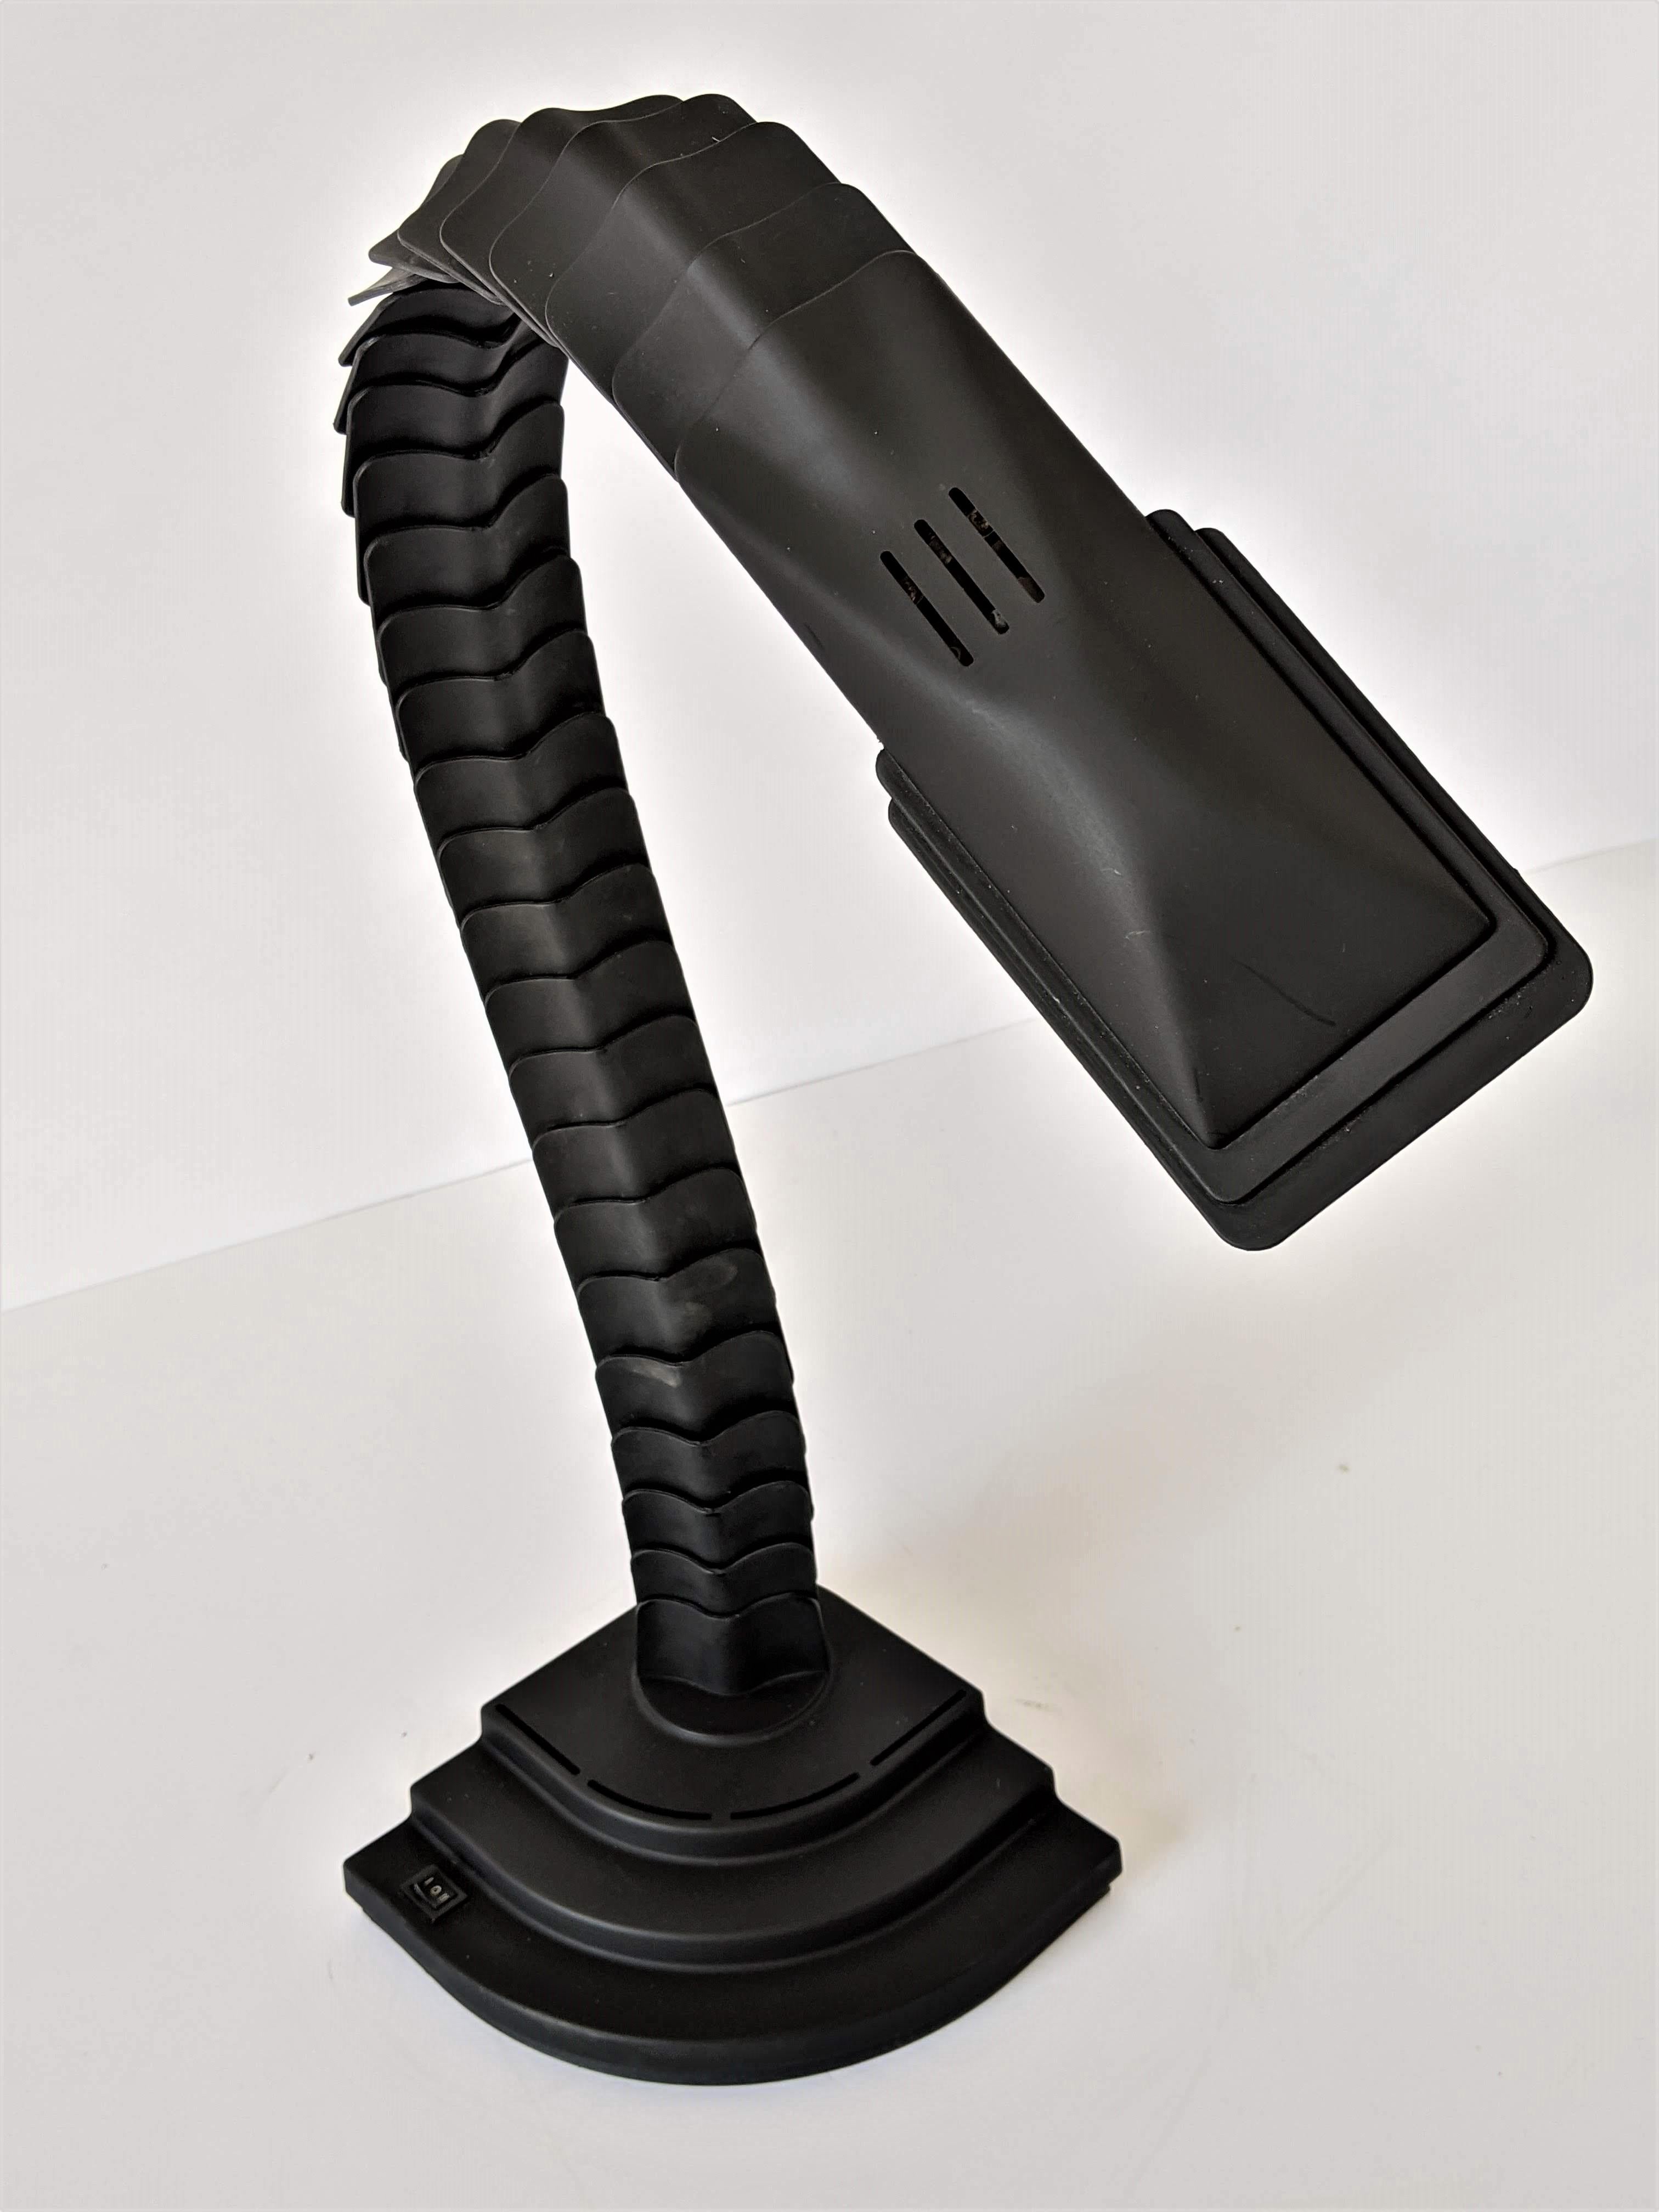 Bold spine shaped and articulated Proteo halogen table lamp.

Playful, easy adjustable in various sculptural shape.

Well made solid construction with black PVC parts and rubber joint.

Measure: 21 in. high when curl as pictured, 36 in